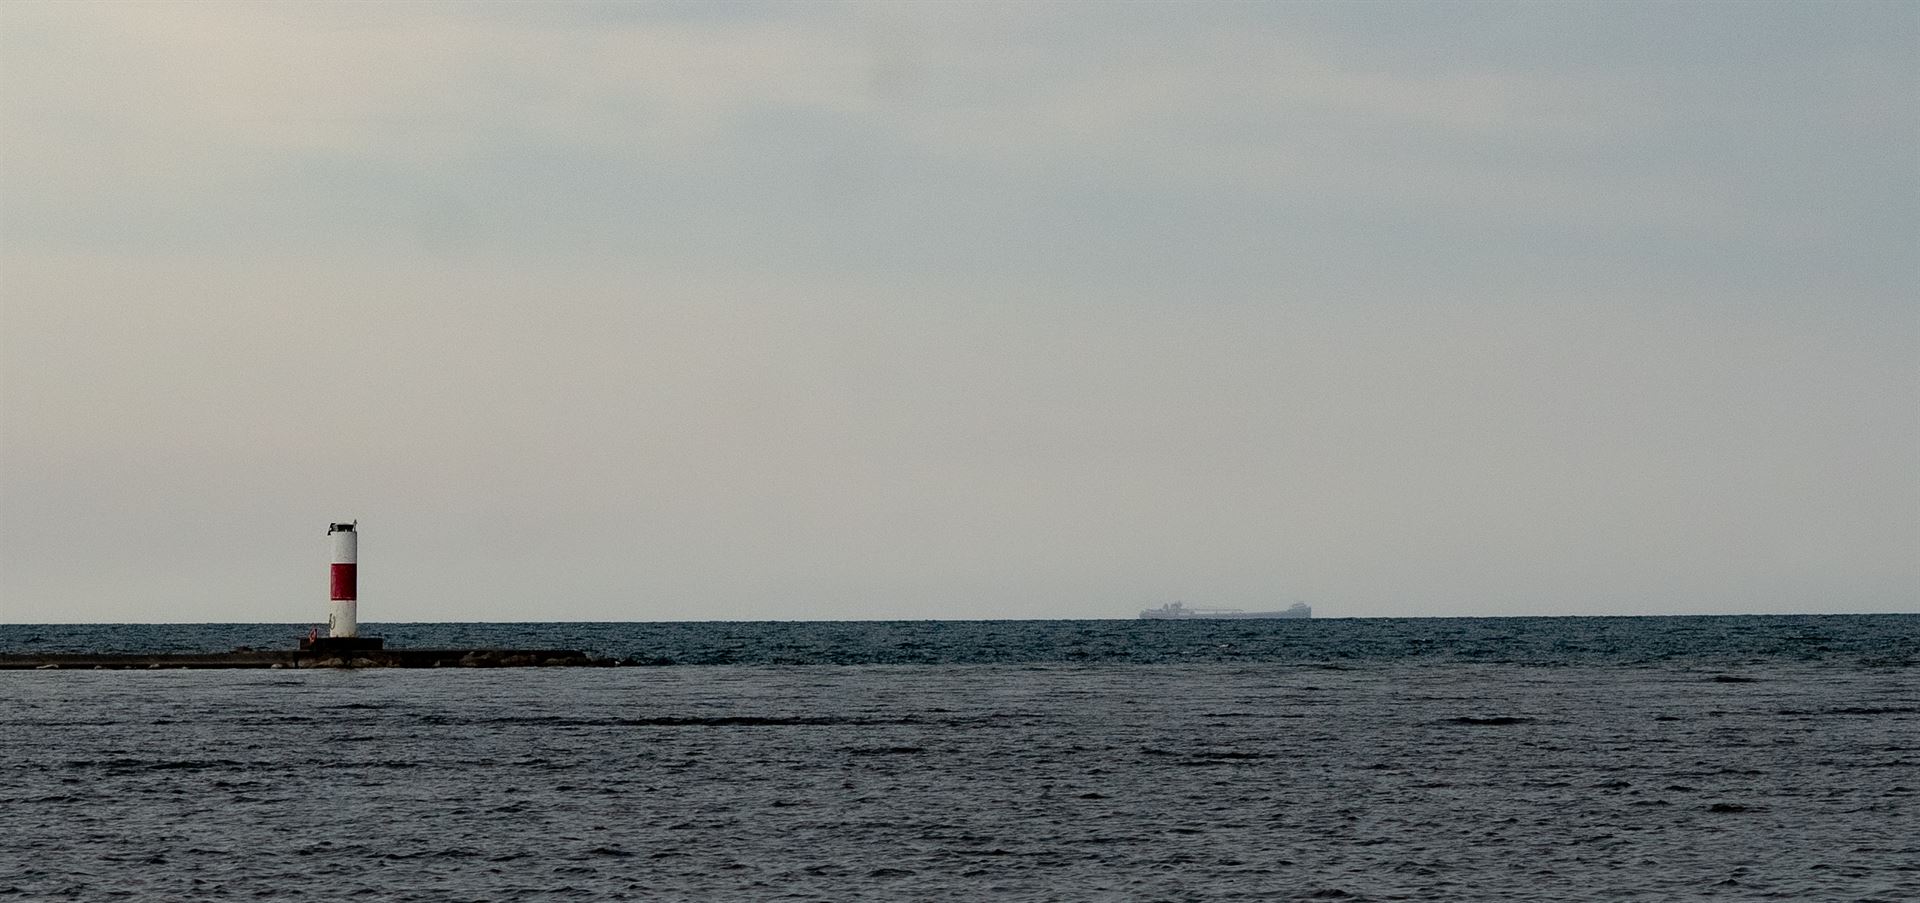 ship in the distance